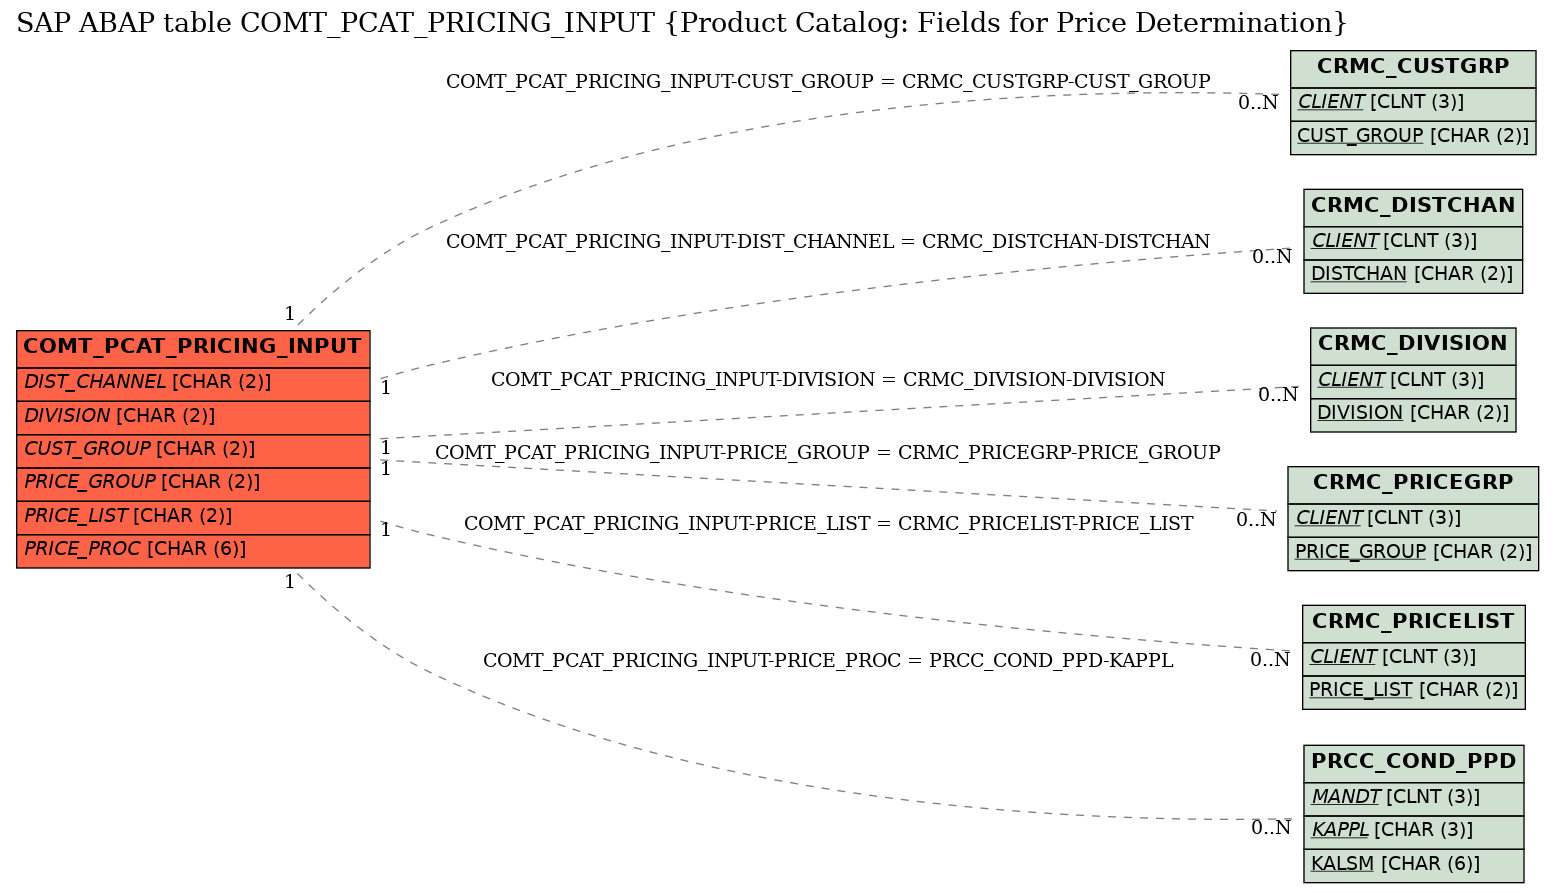 E-R Diagram for table COMT_PCAT_PRICING_INPUT (Product Catalog: Fields for Price Determination)